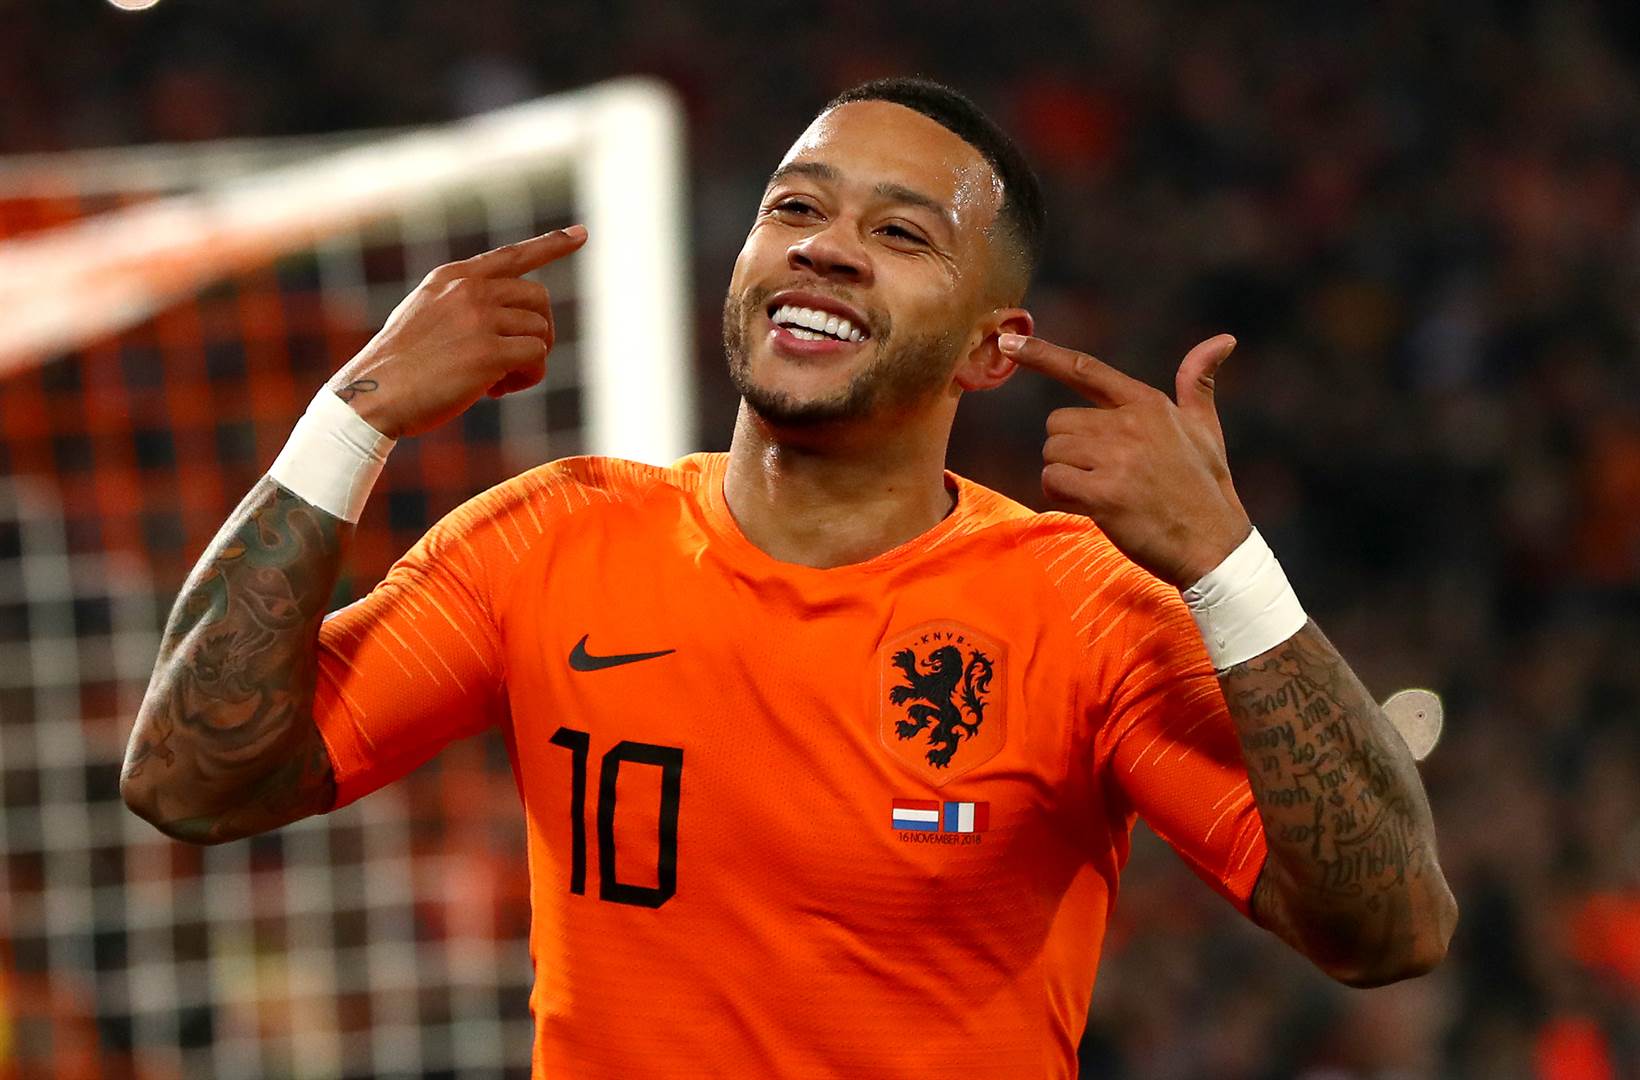 Memphis Depay drops his NEW song on Instagram Live (4AM Palm Flow